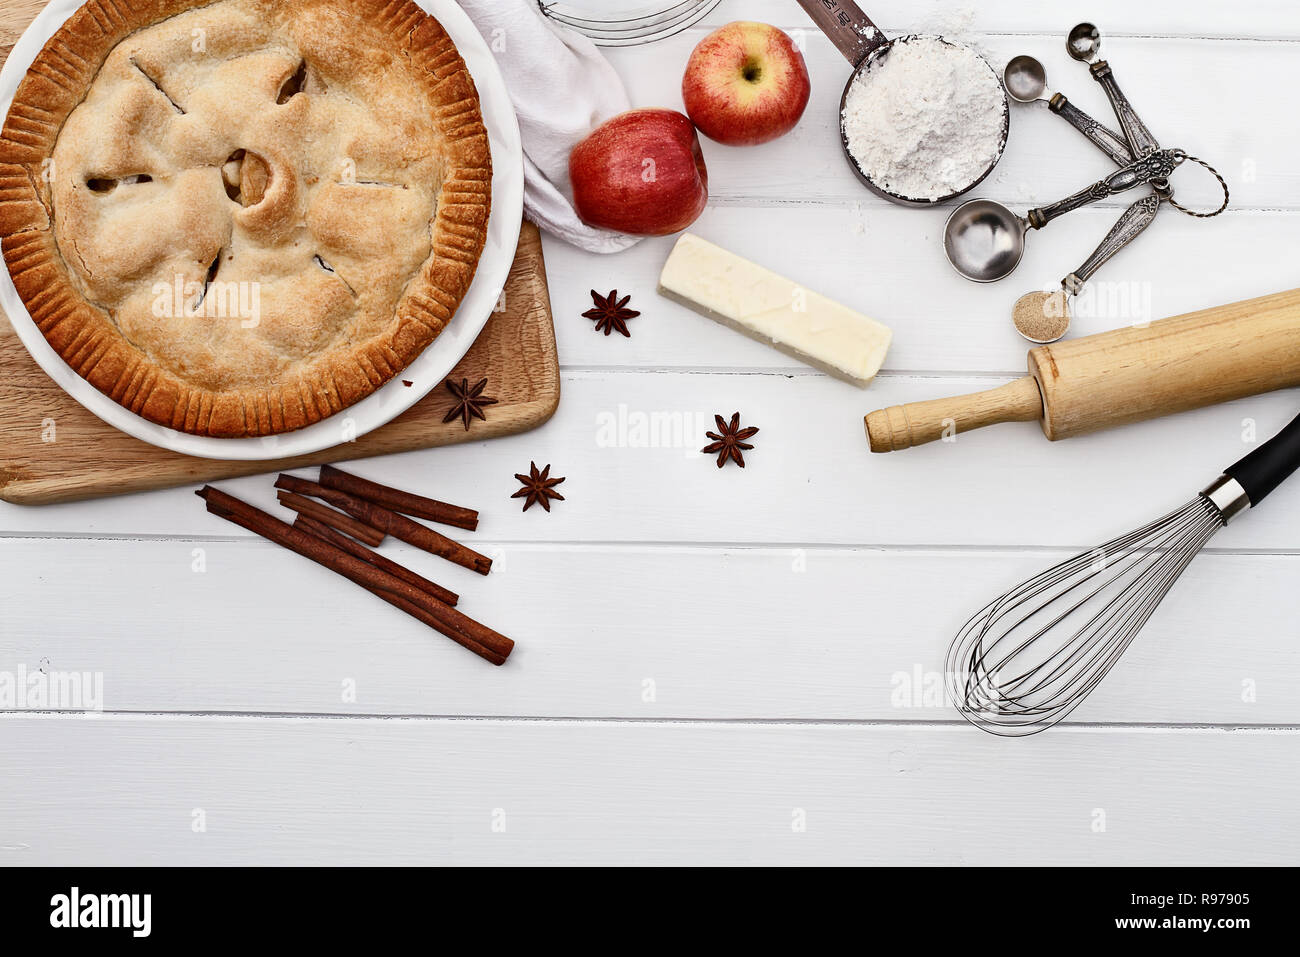 Homemade apple pie dessert and ingredients shot from overhead over a white wooden table top with room for copy space. Stock Photo